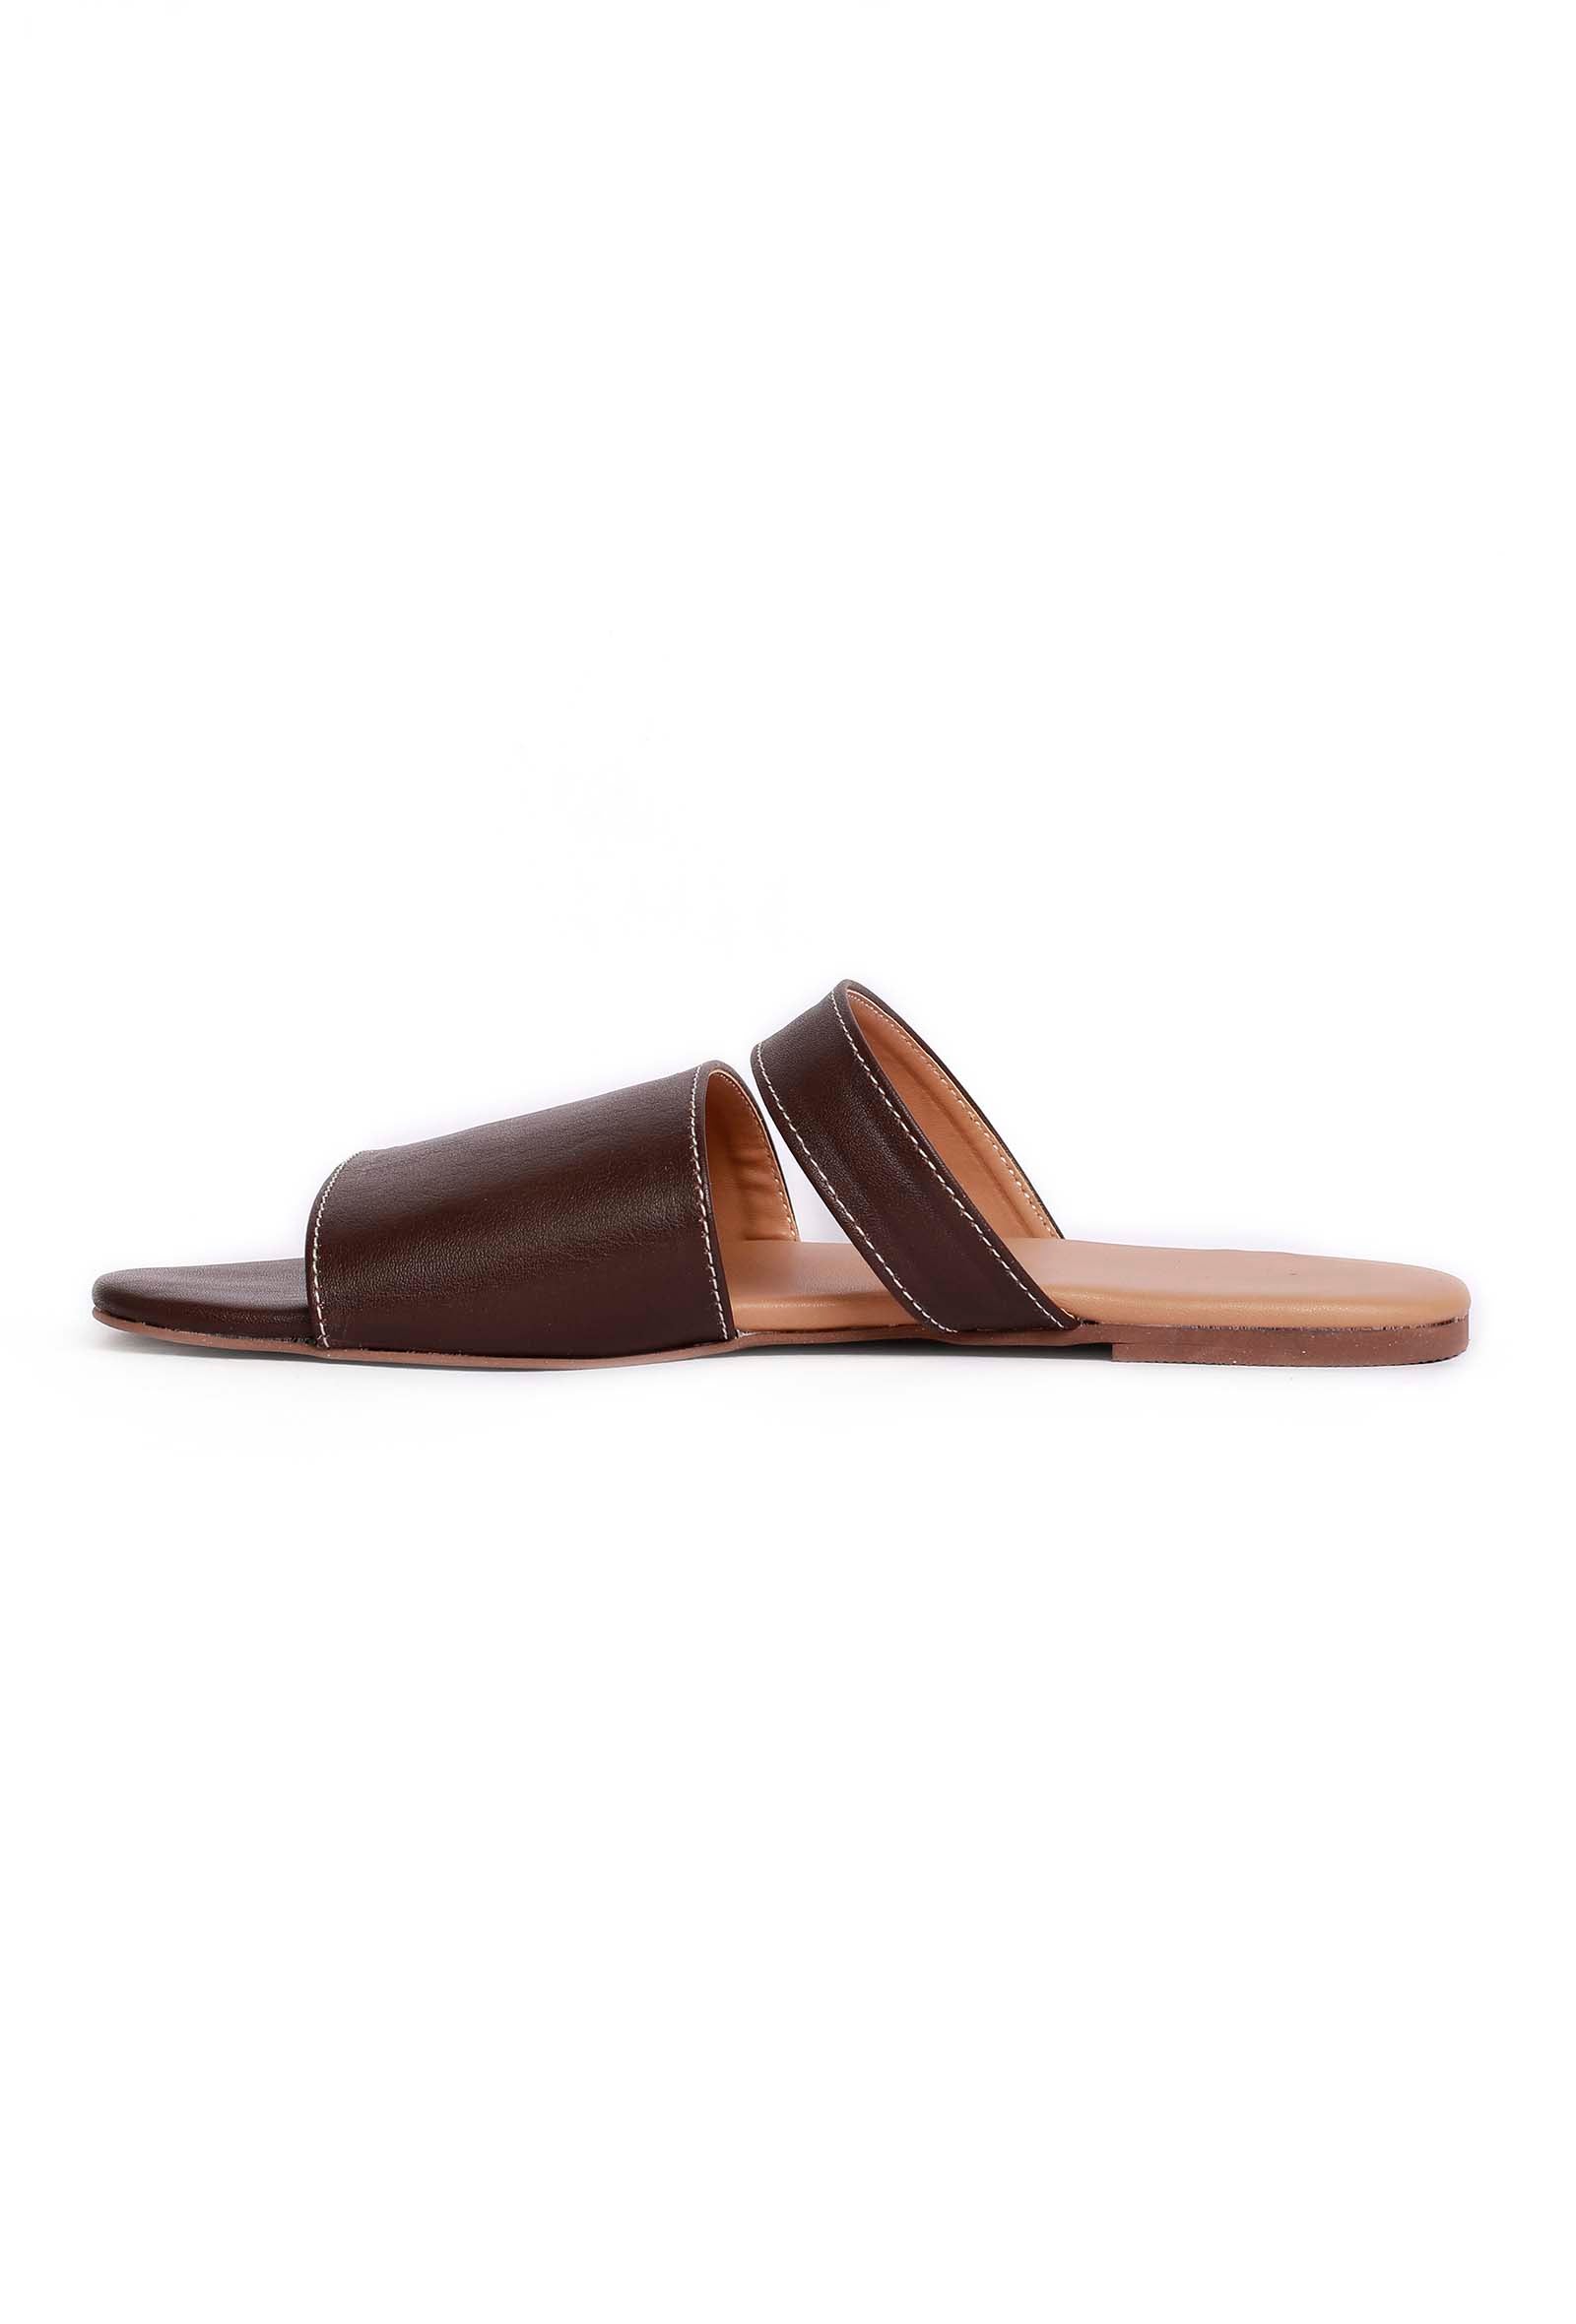 Tortilla Brown Cruelty Free Leather Sliders